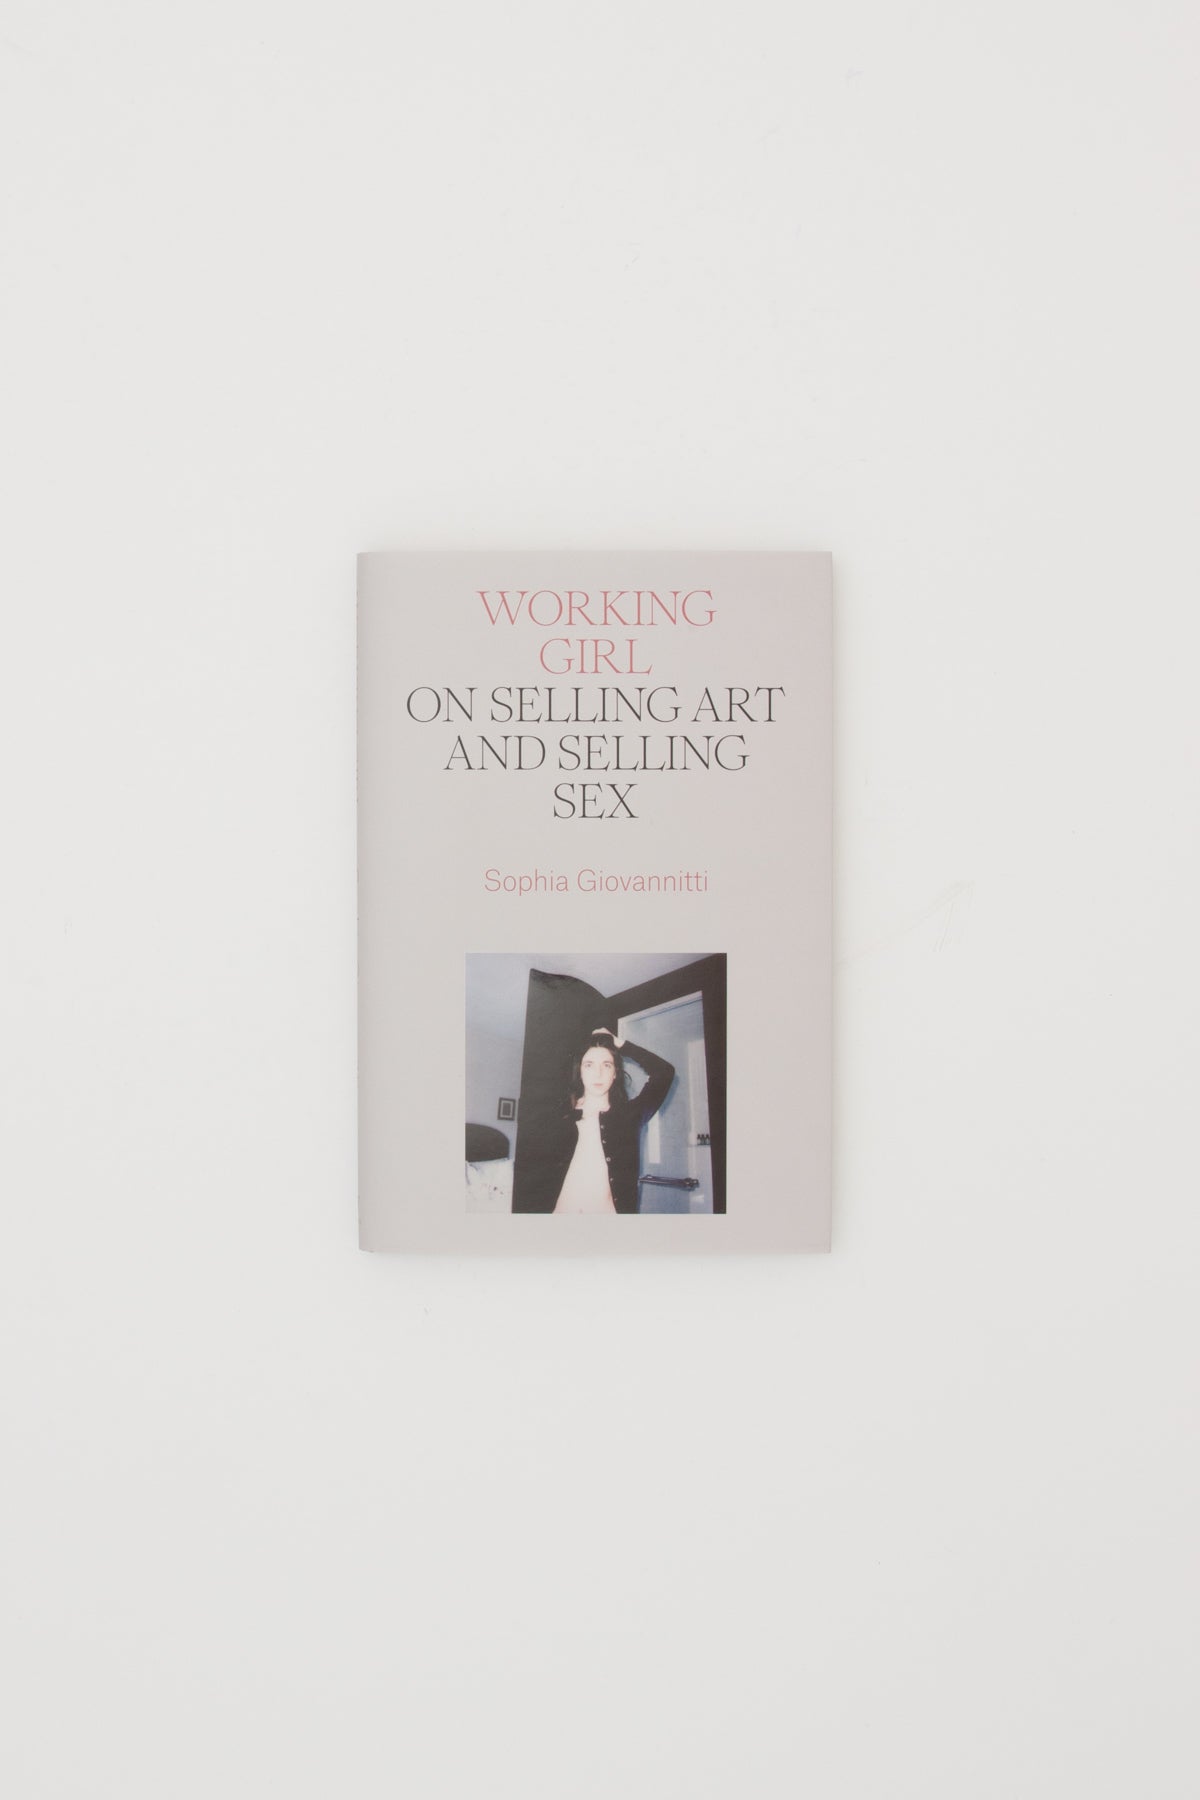 Working Girl: On Selling Art and Selling Sex - Sophia Giovannitti